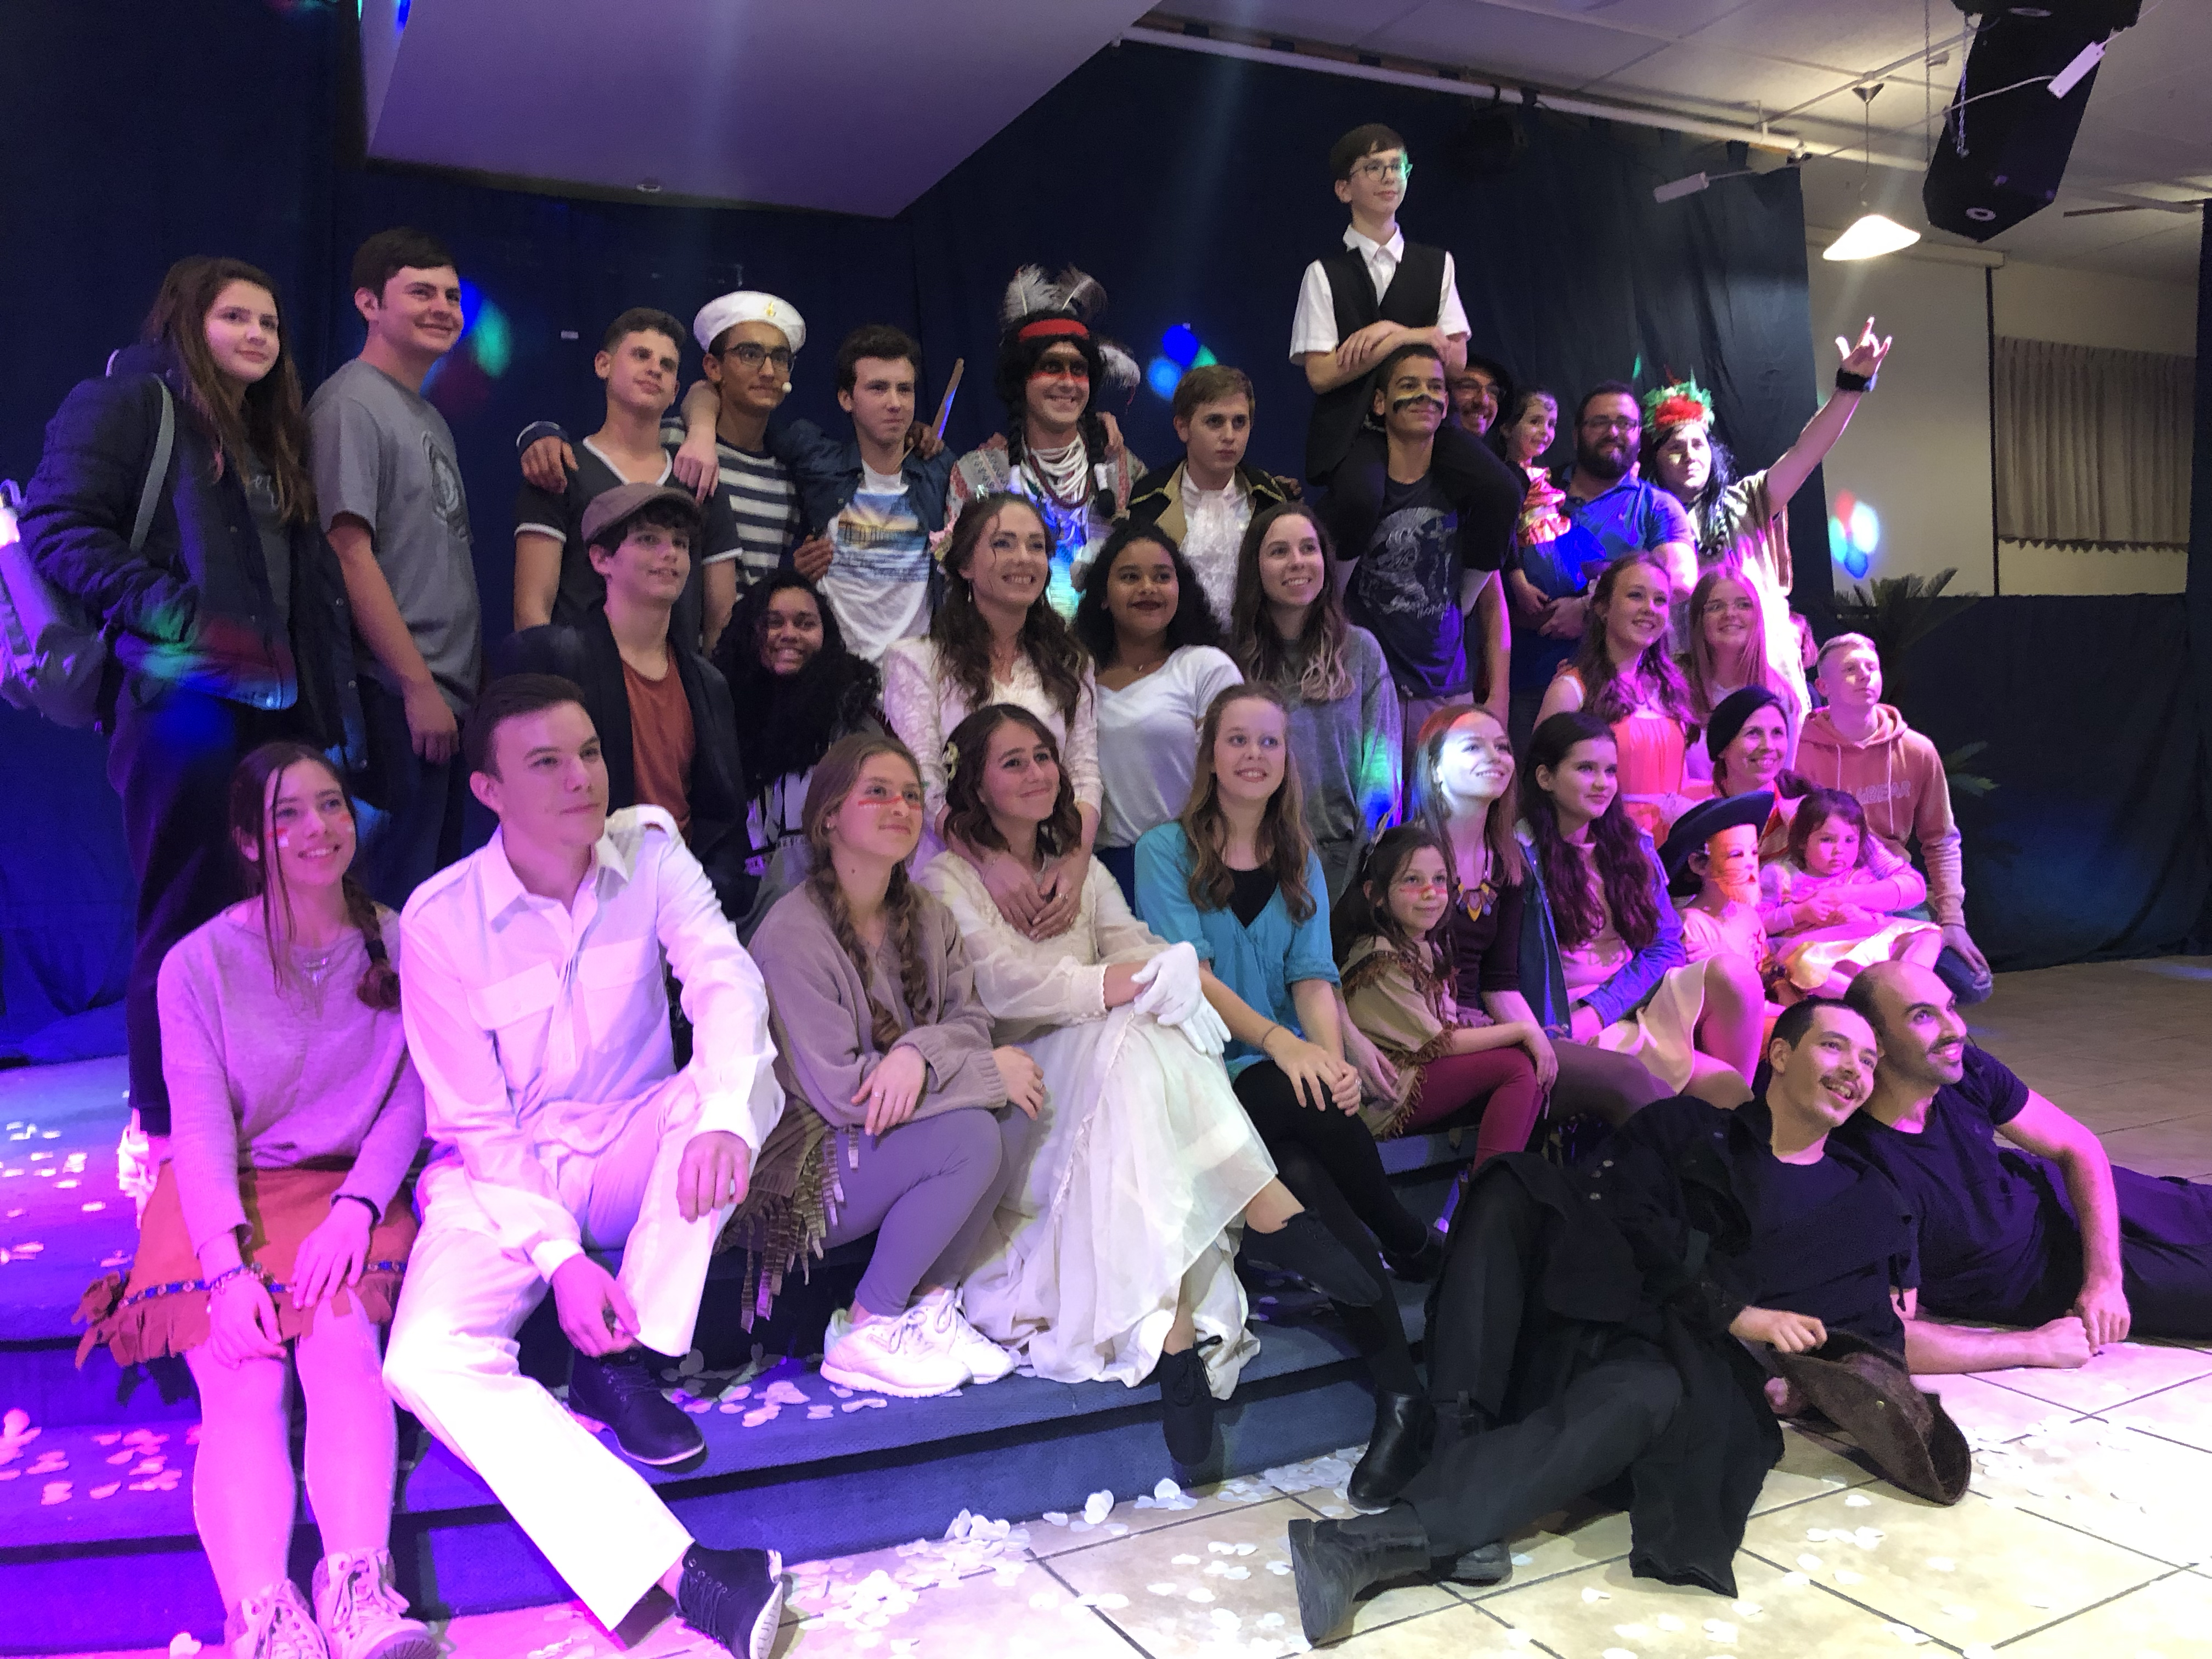 Full cast and crew of the Purim play, retelling the story of Esther.